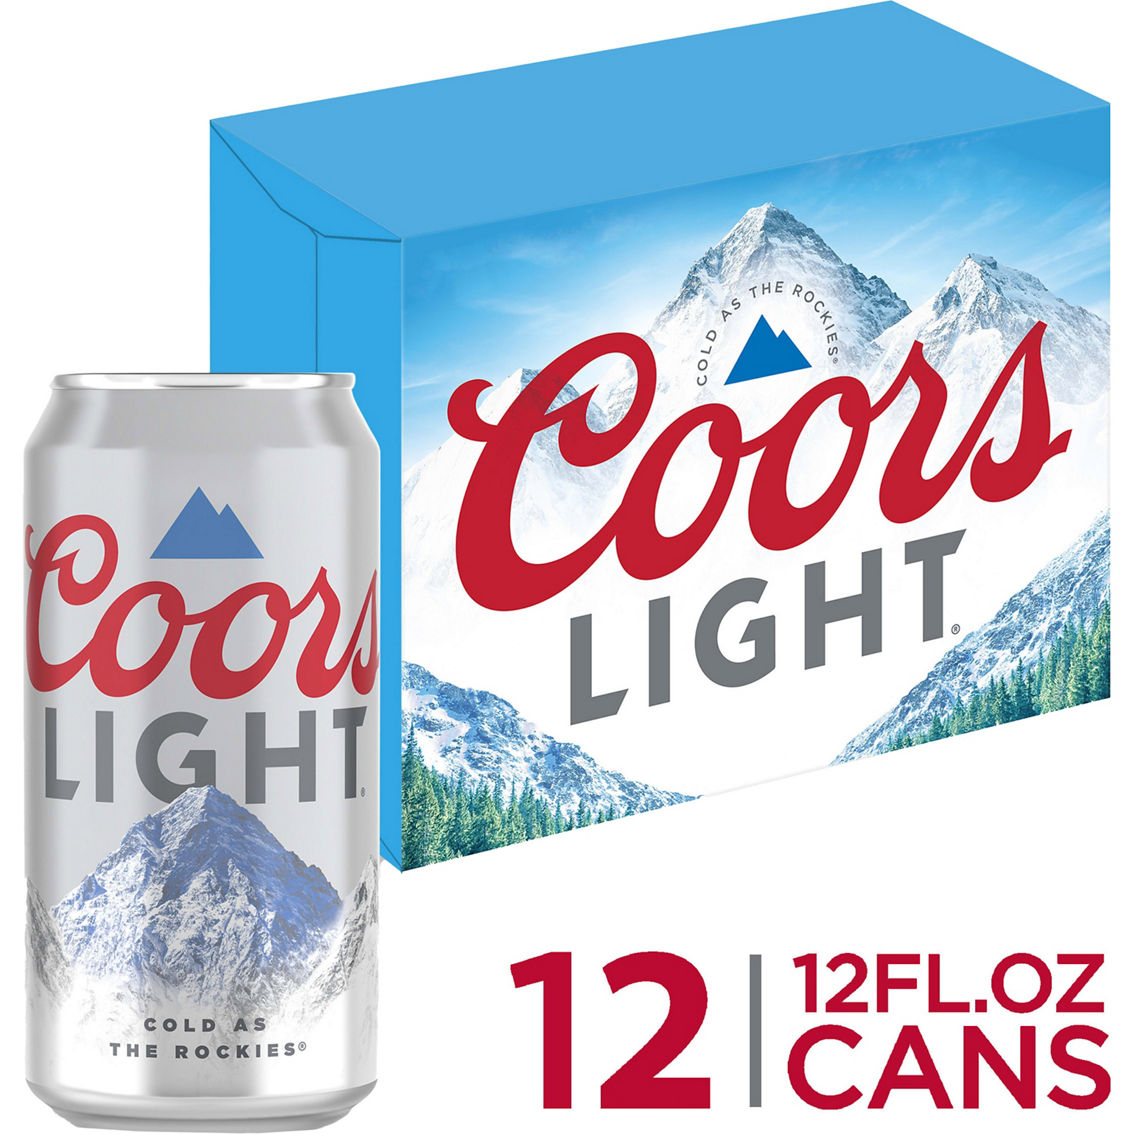 Coors Light 12 pk. 12 oz. Can - Image 2 of 2